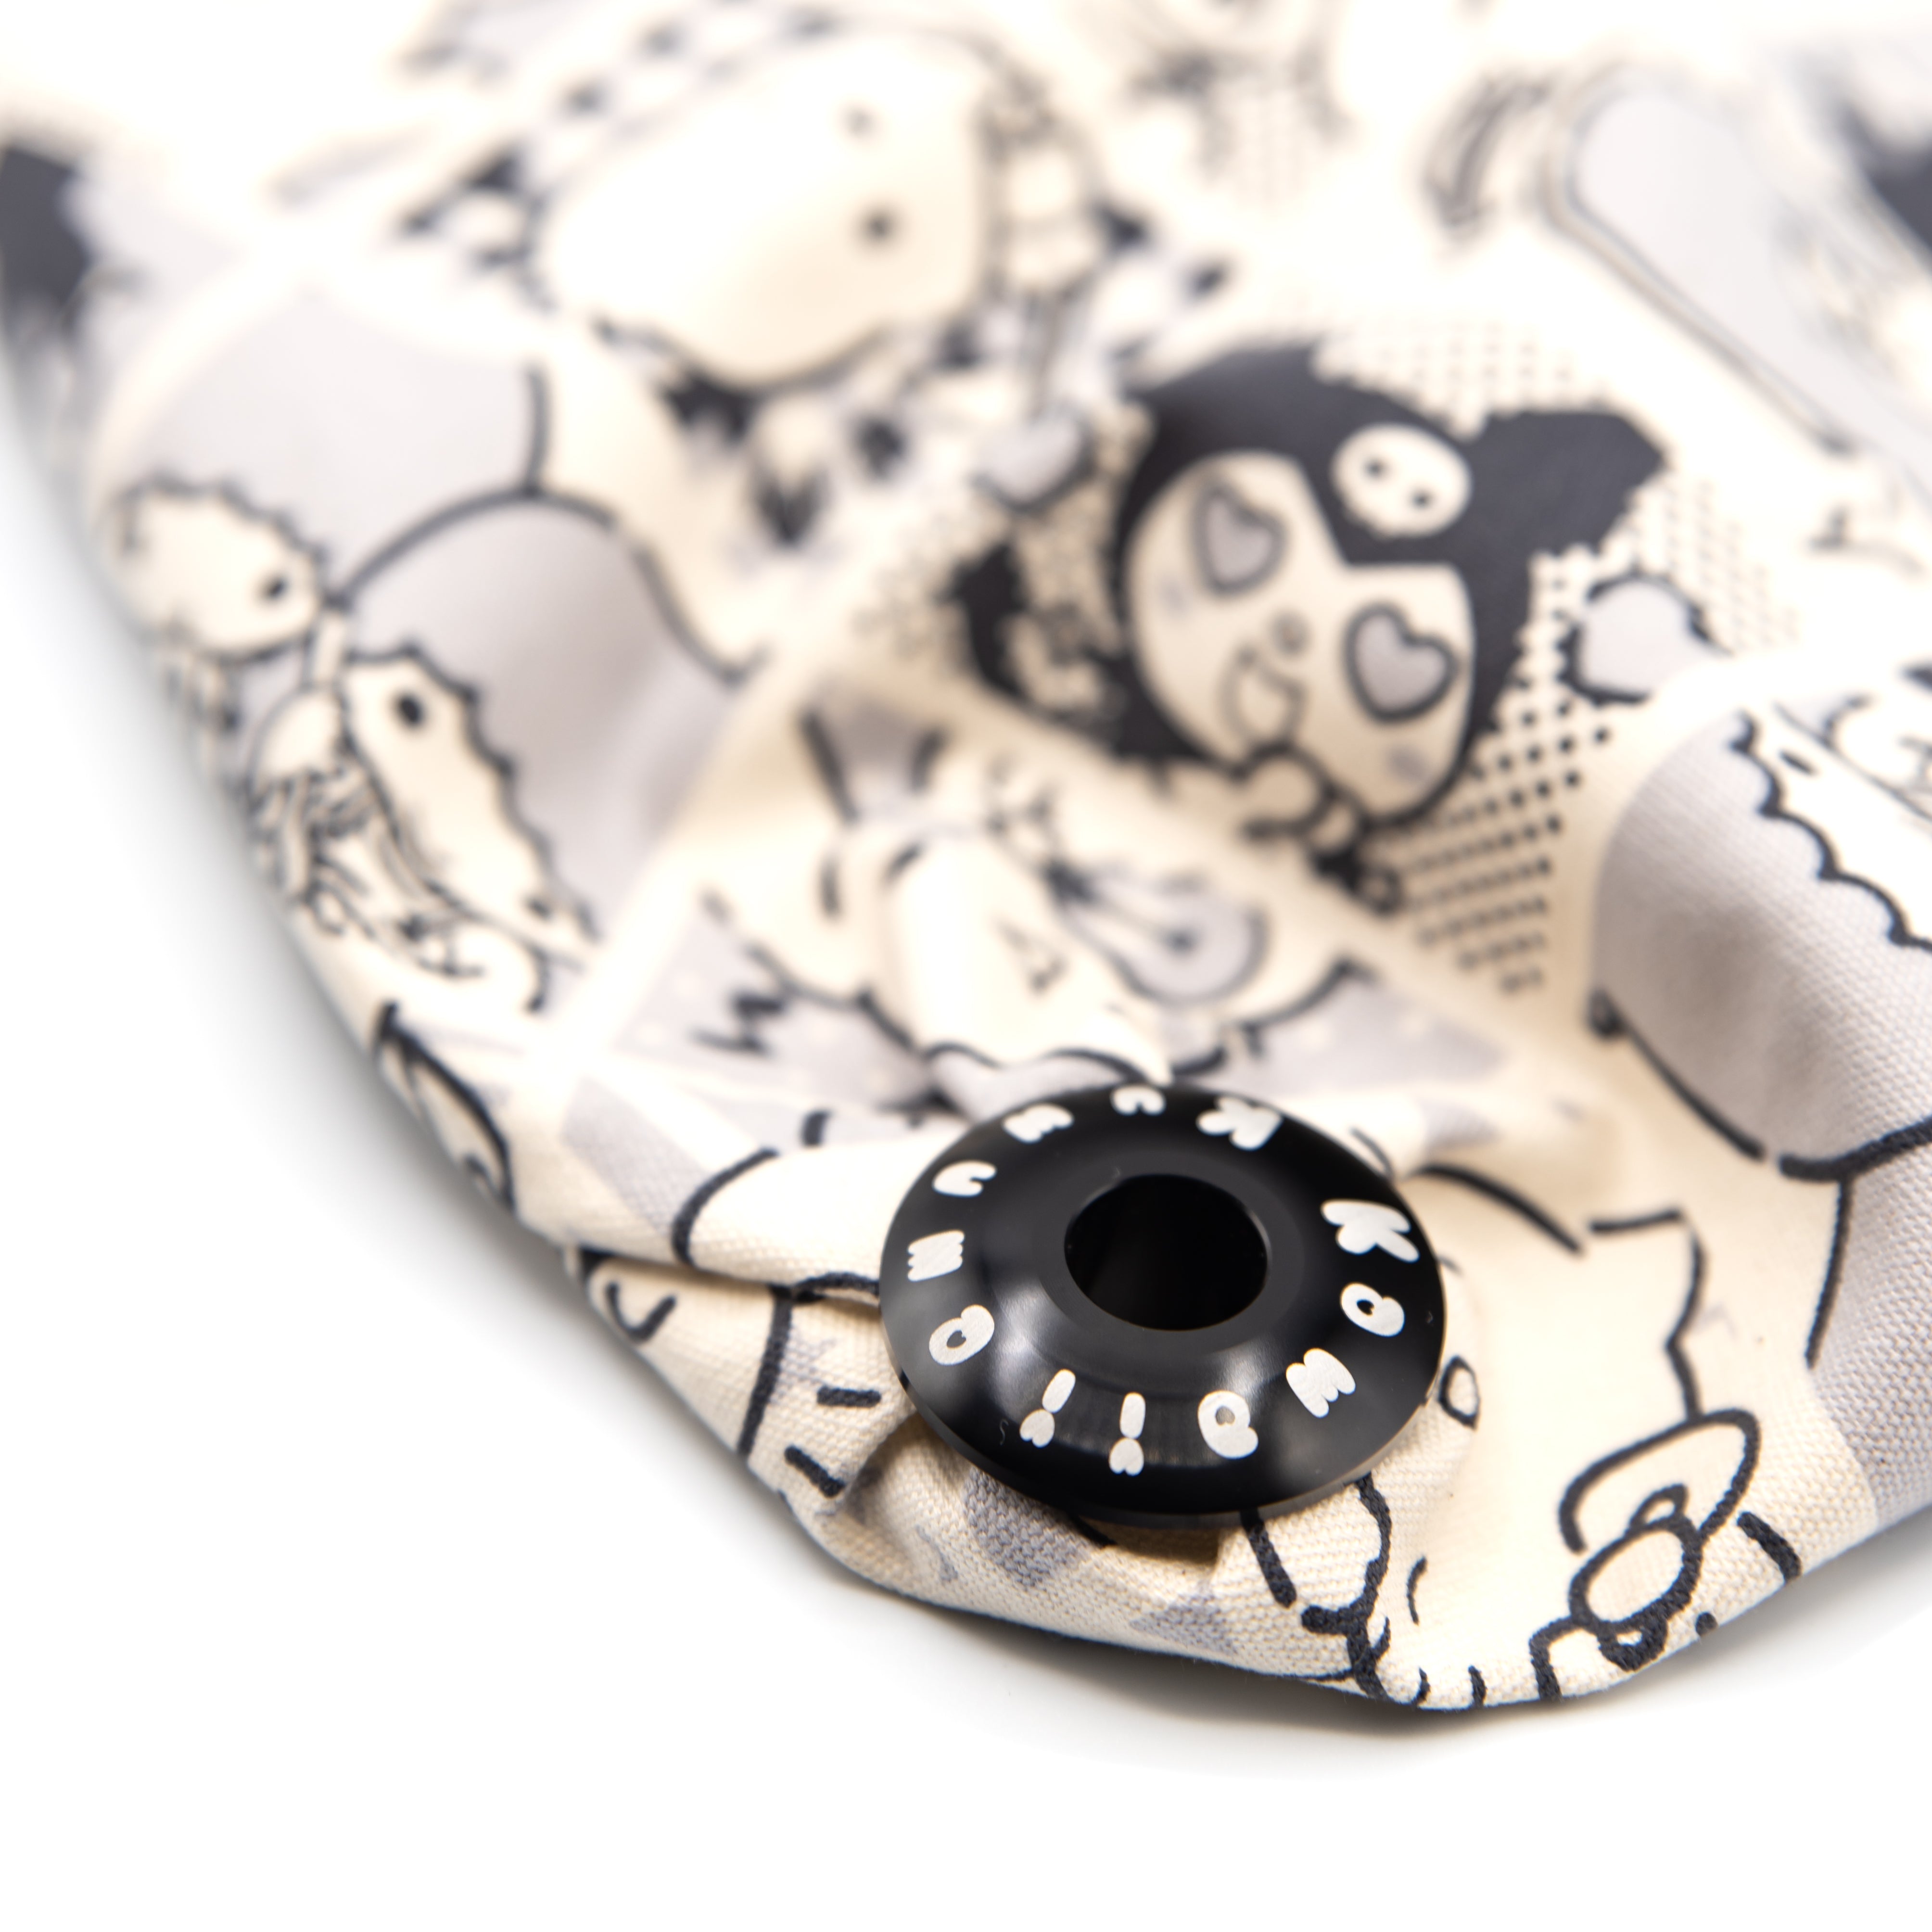 Hello Kitty and Friends Shift Boot Cover Monochrome Edition